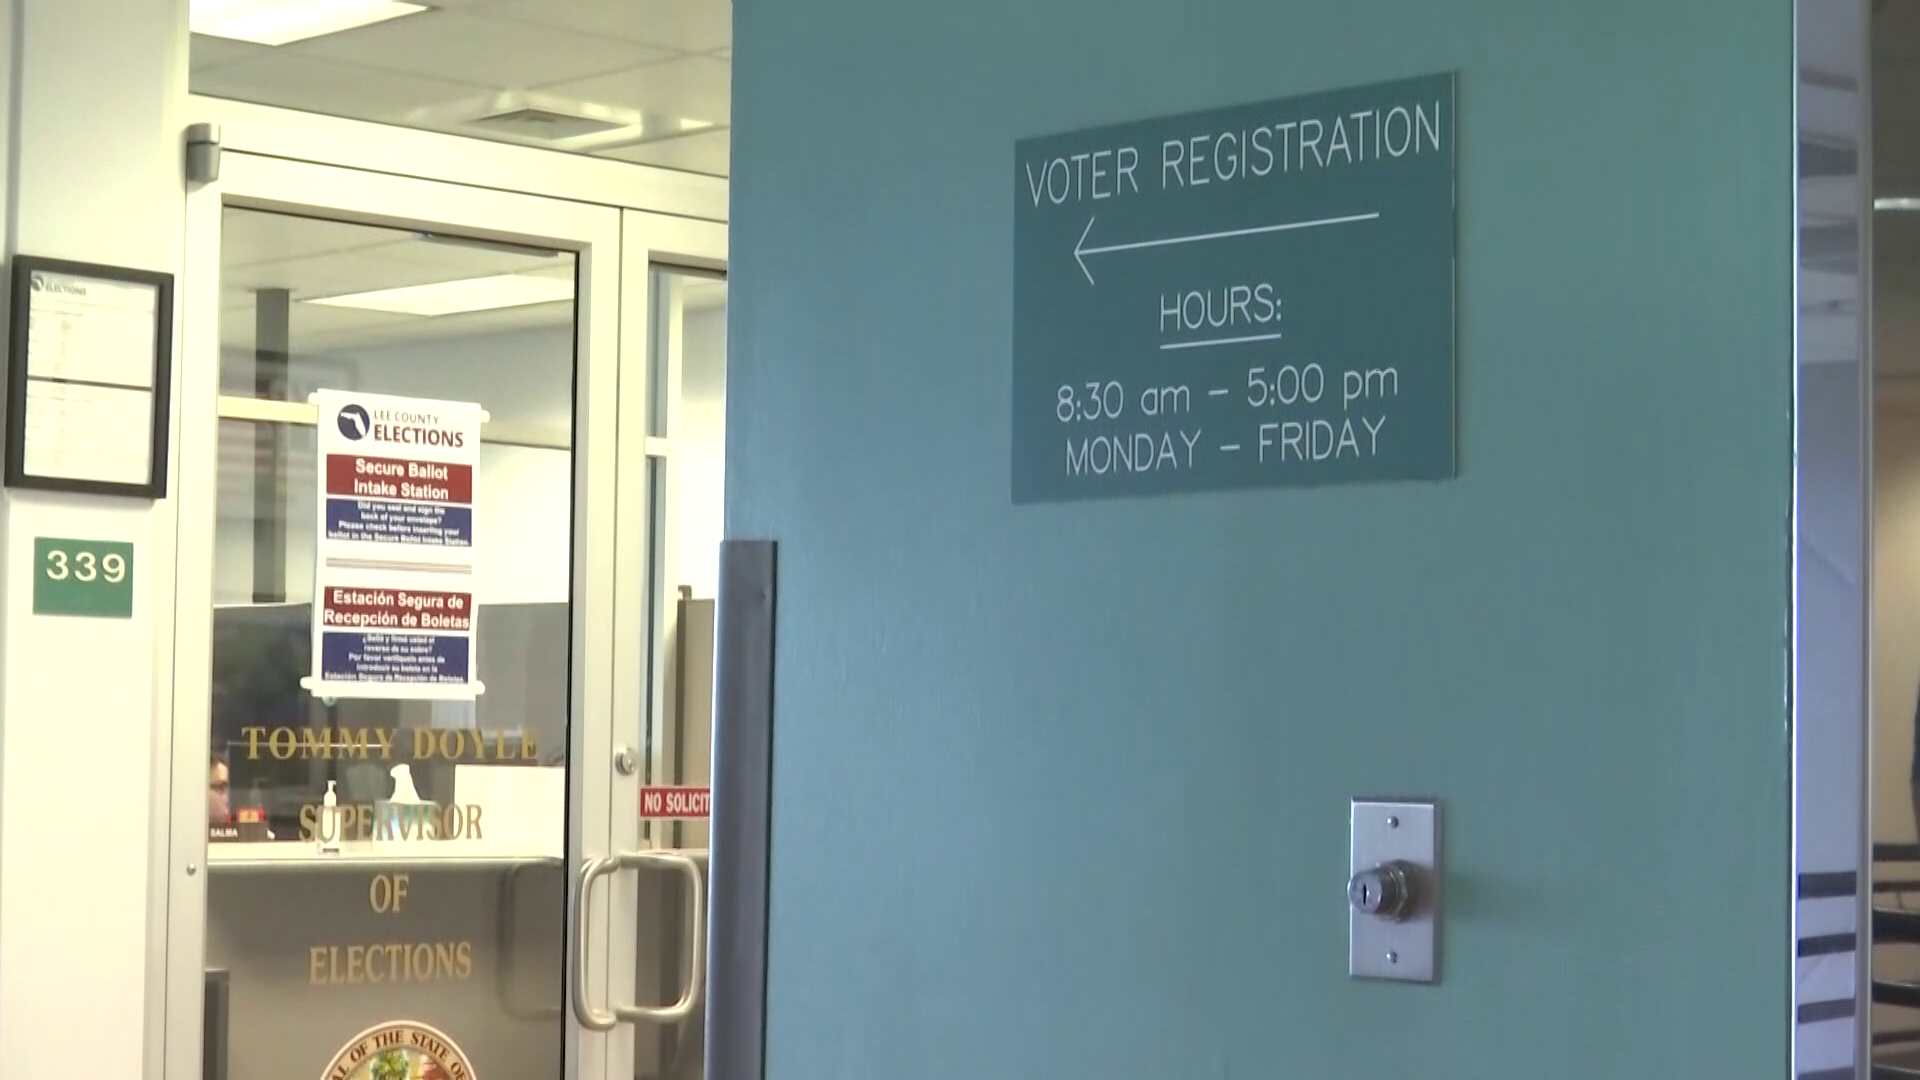 Lee County election officials urge people to vote early